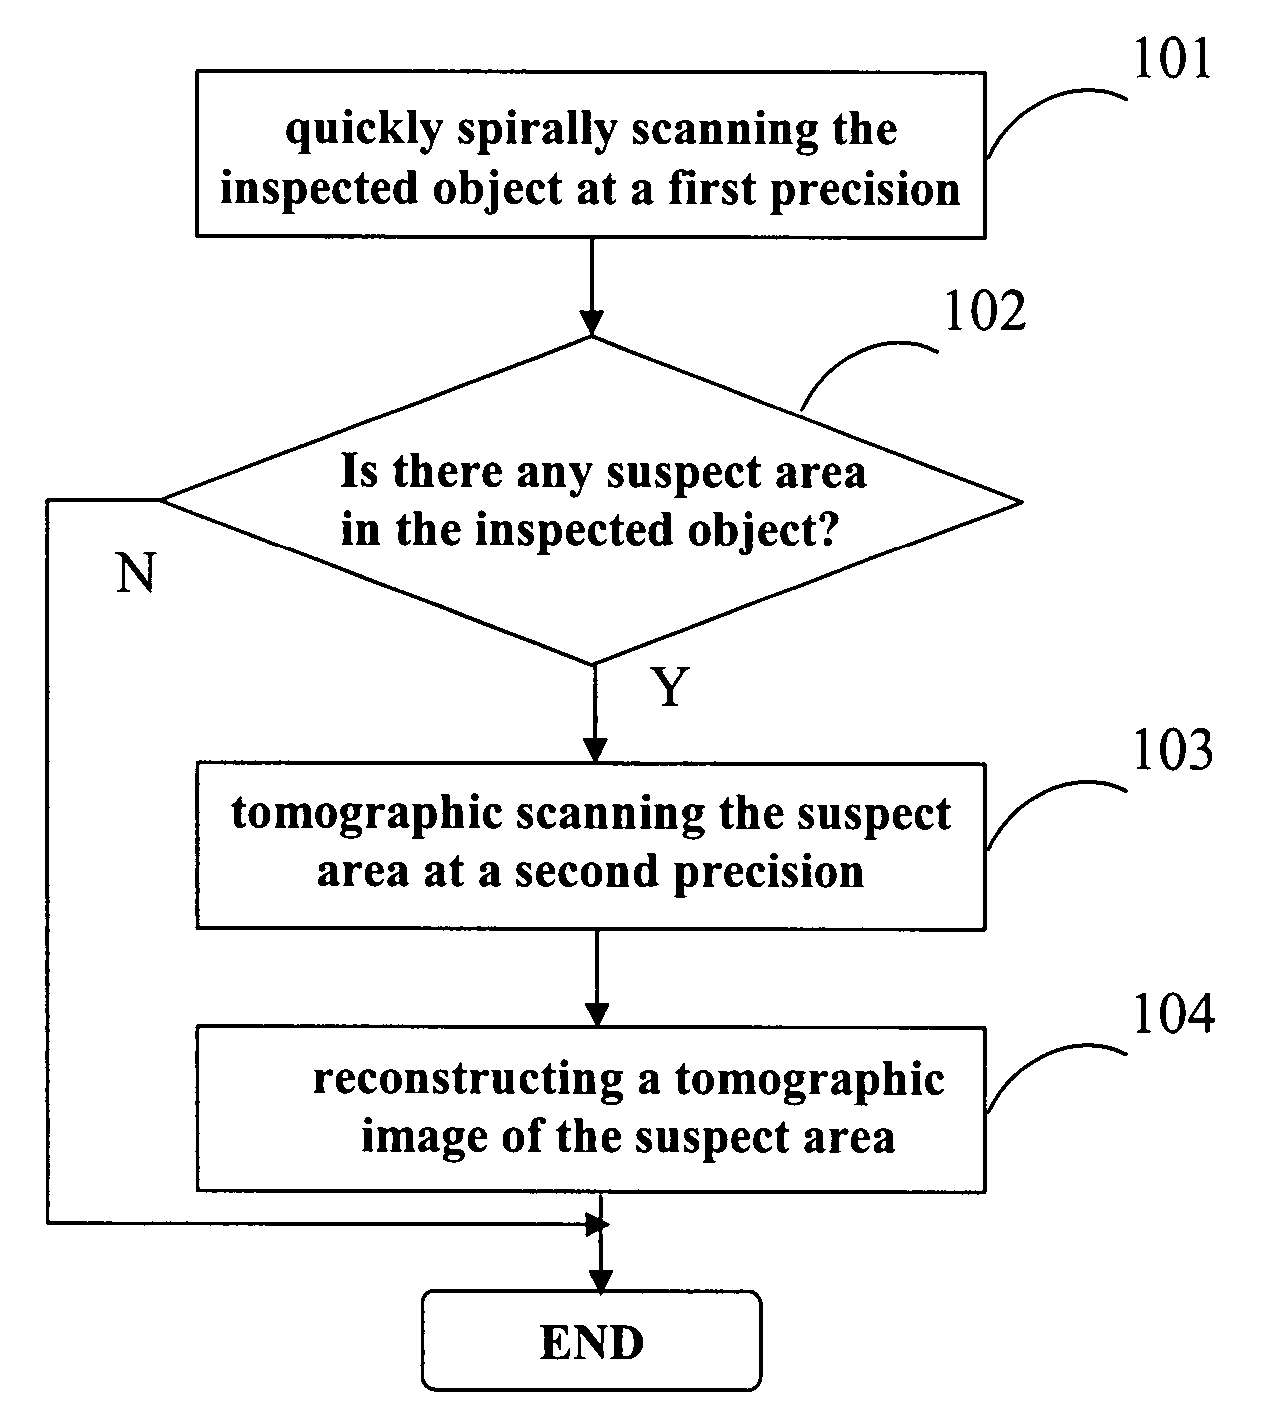 Cargo security inspection method and system based on spiral scanning